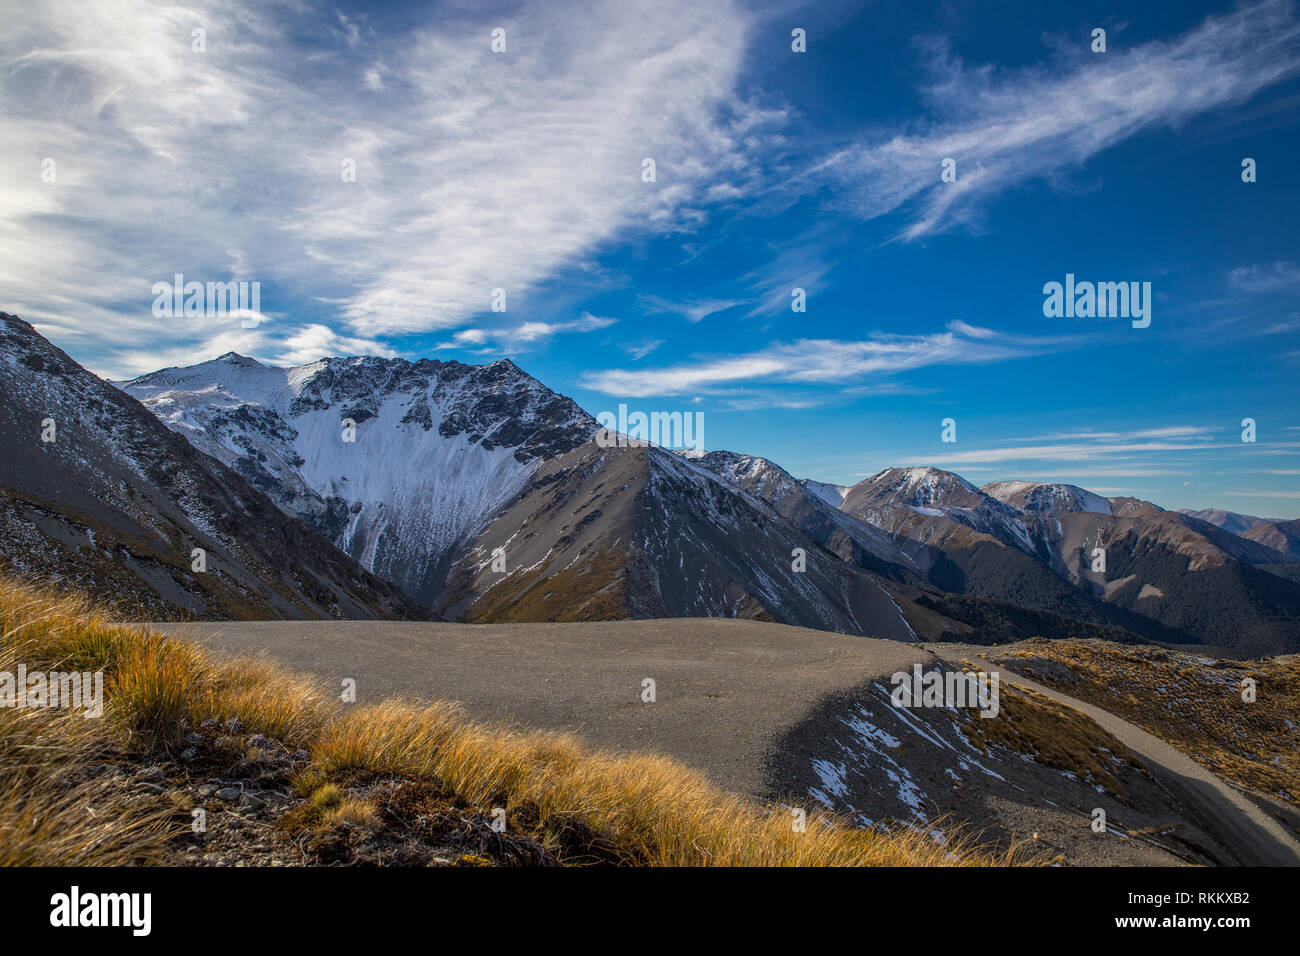 The view from Mt Cheeseman of some mountains in the Craigieburn Range, New Zealand Stock Photo